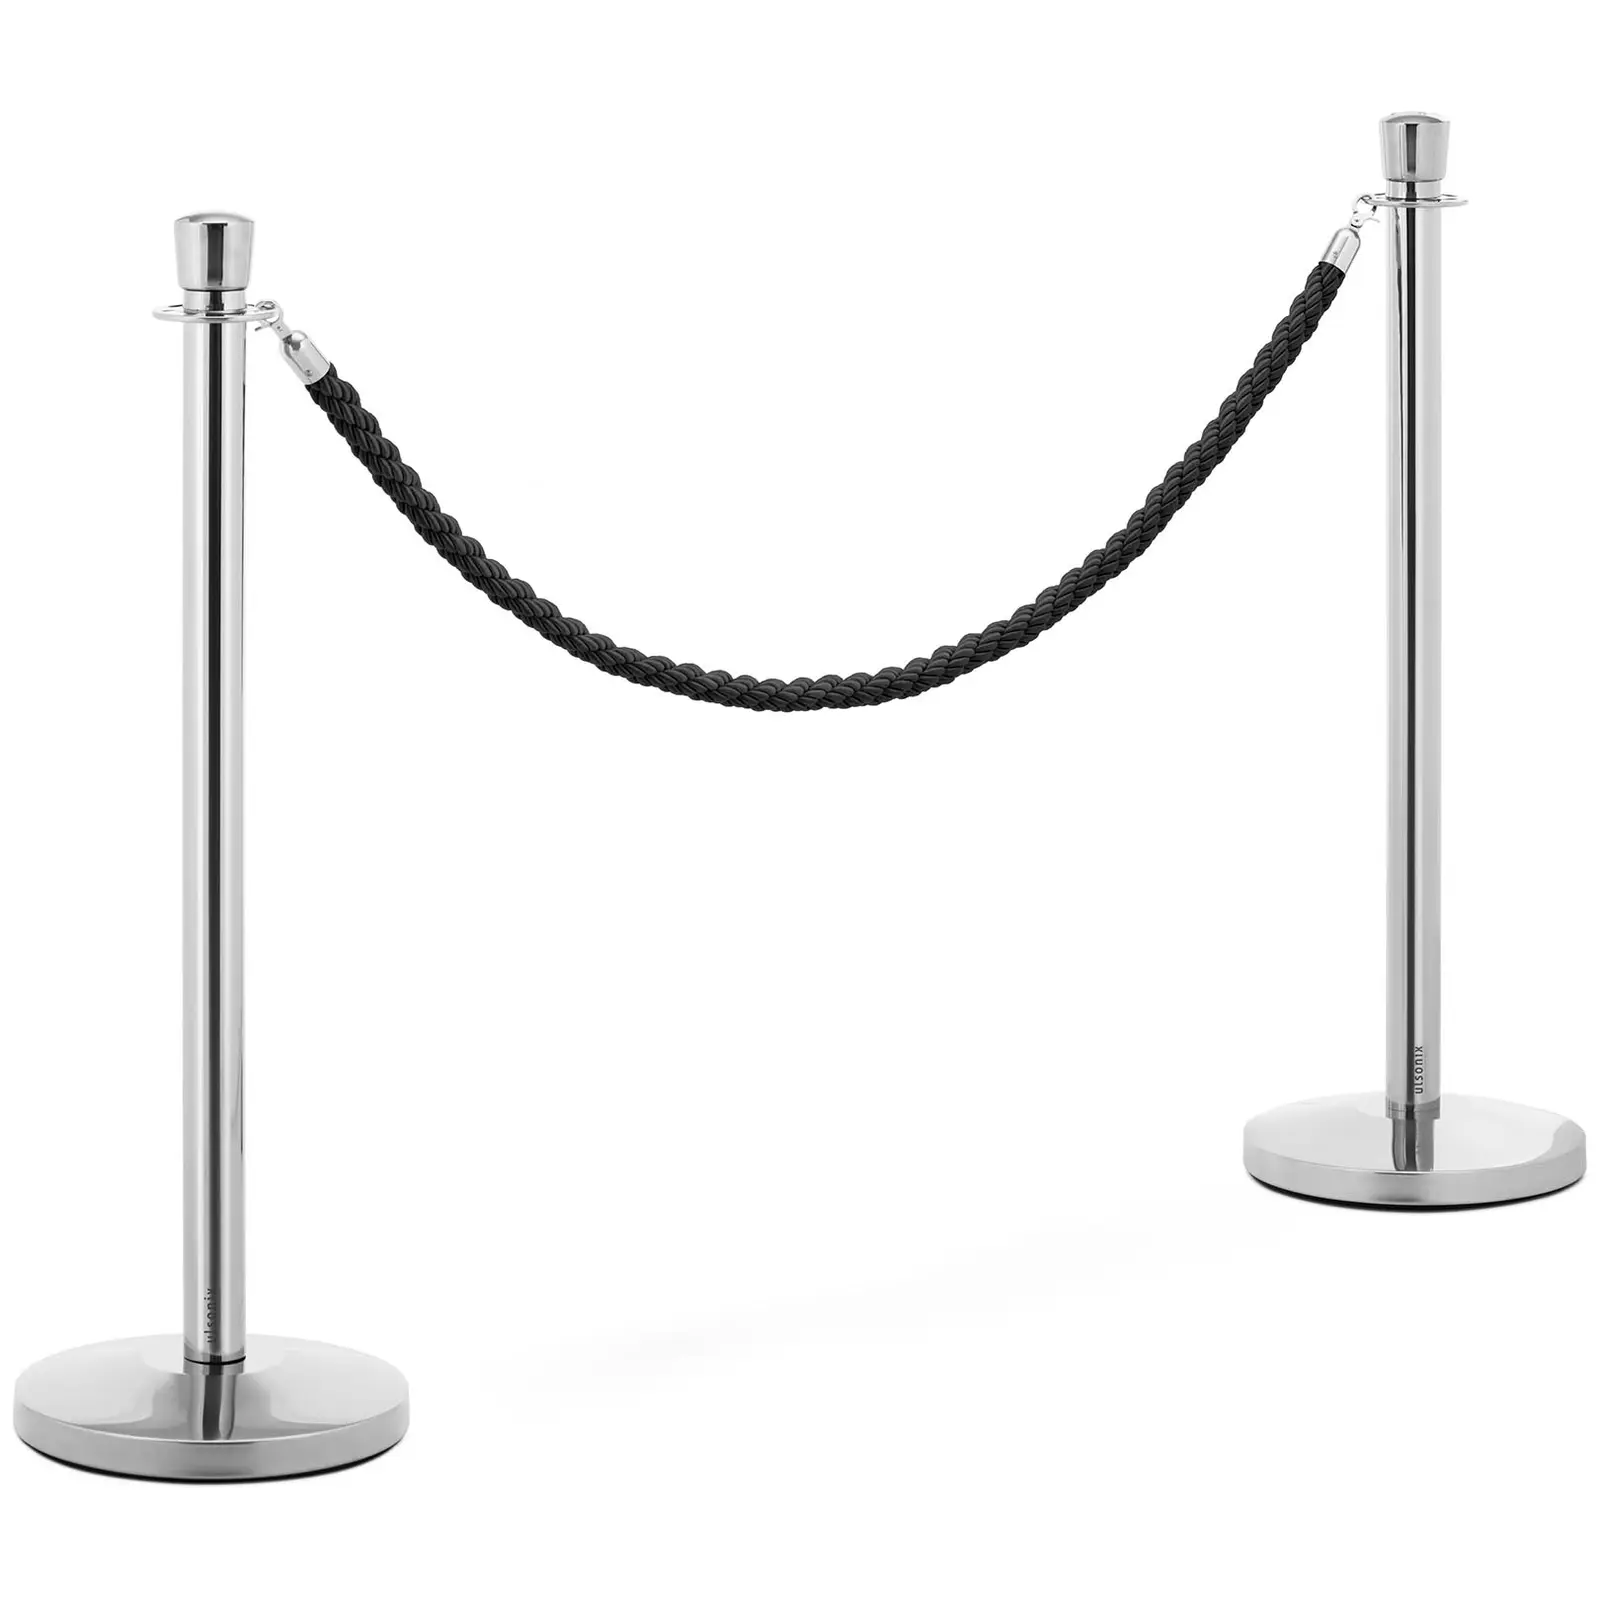 2 Barrier Posts - with barrier rope - 150 cm - polished stainless steel